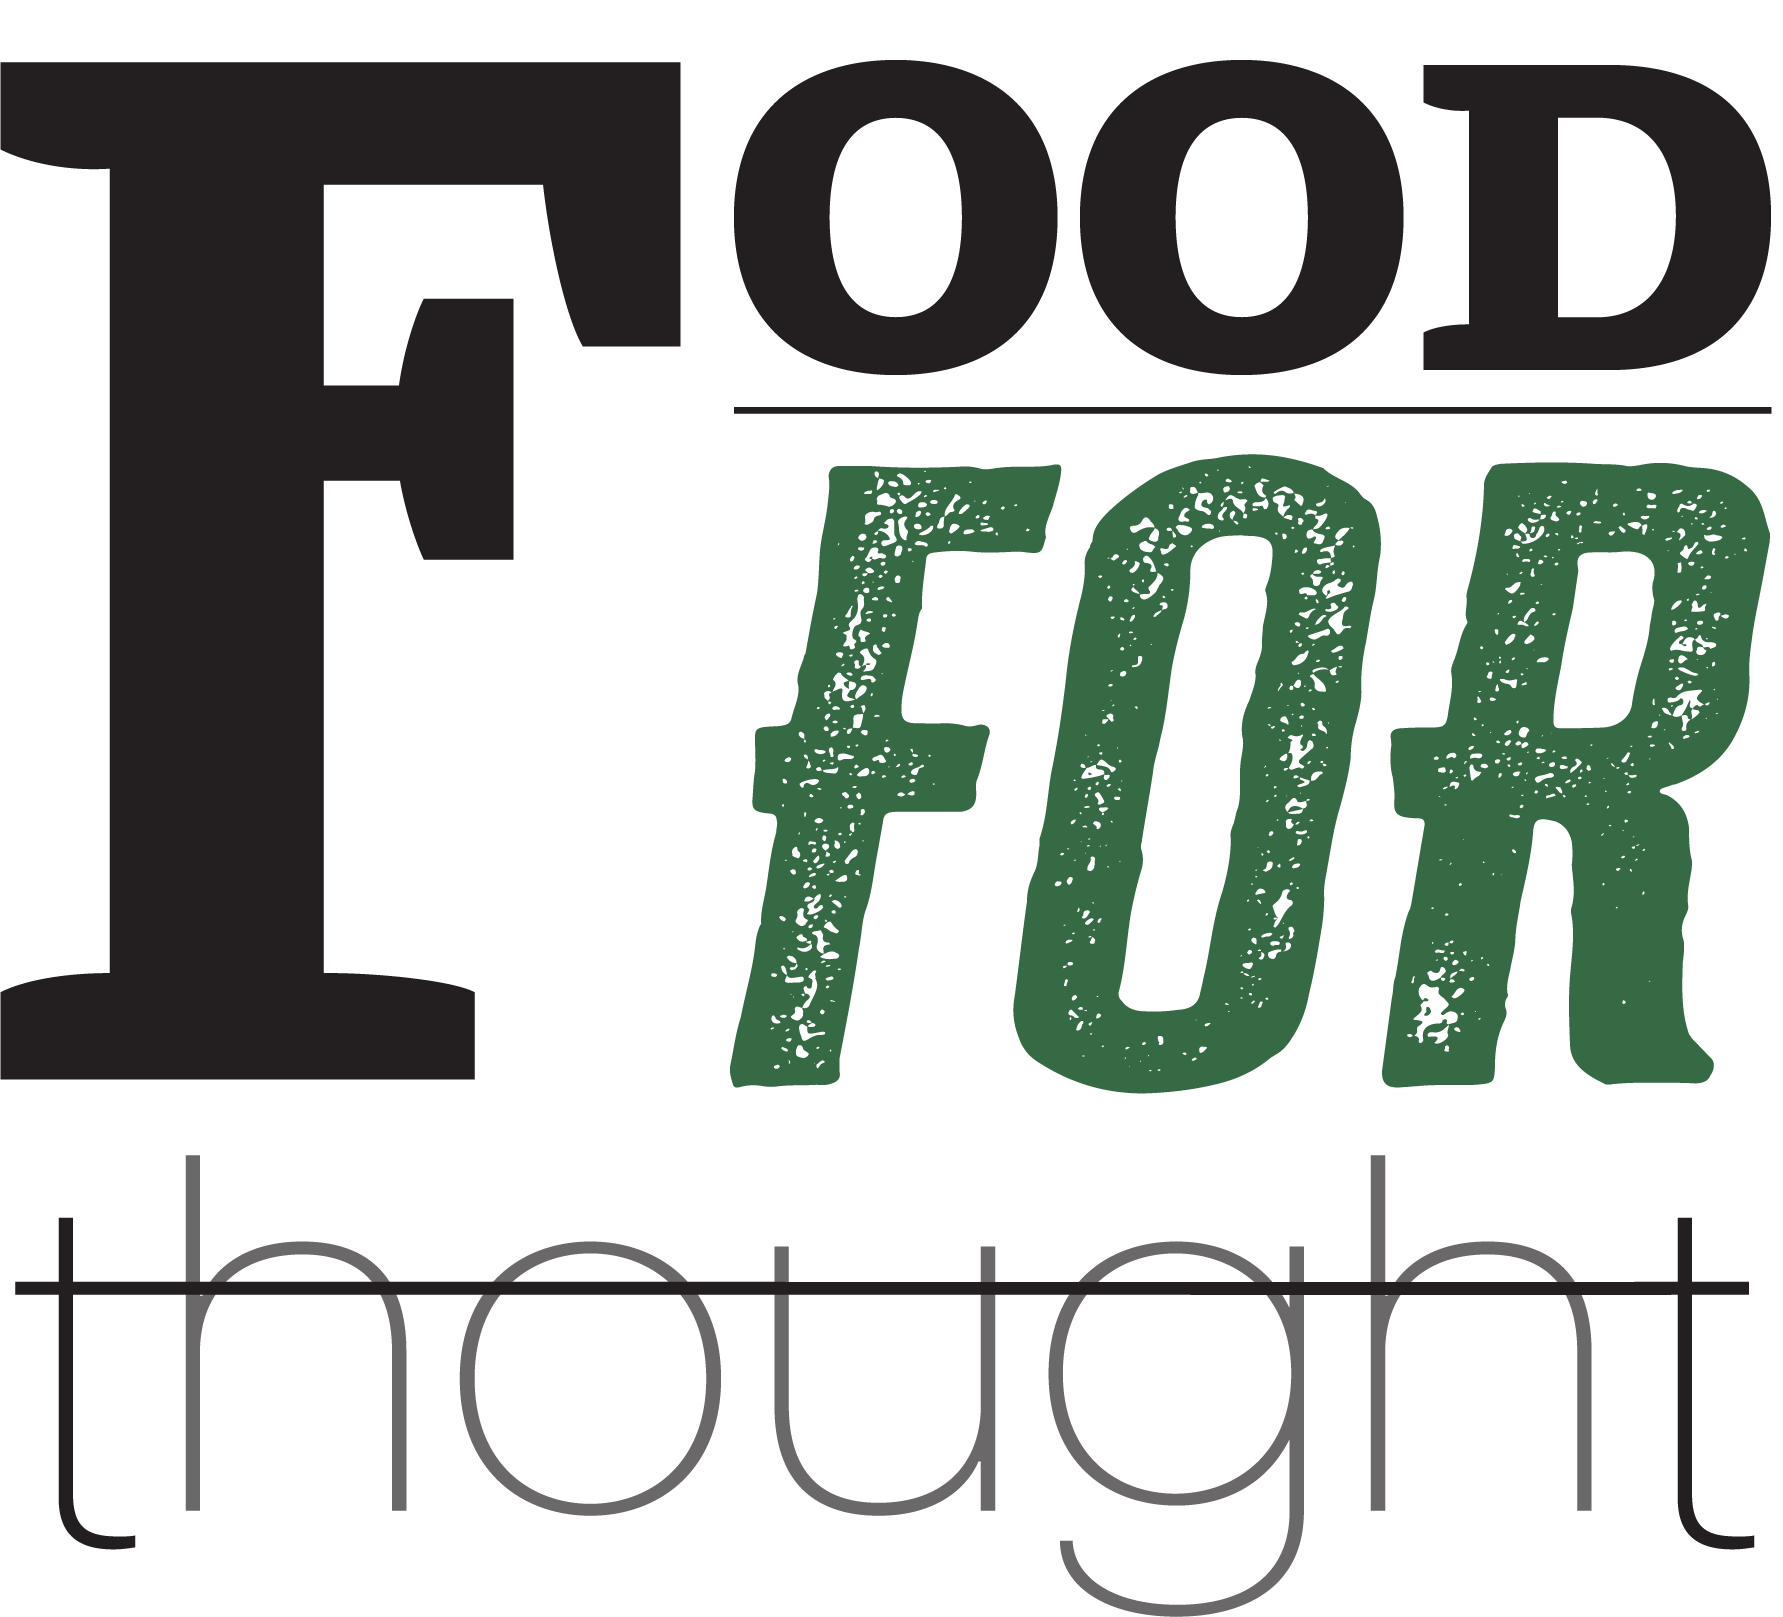 Food4thought logo